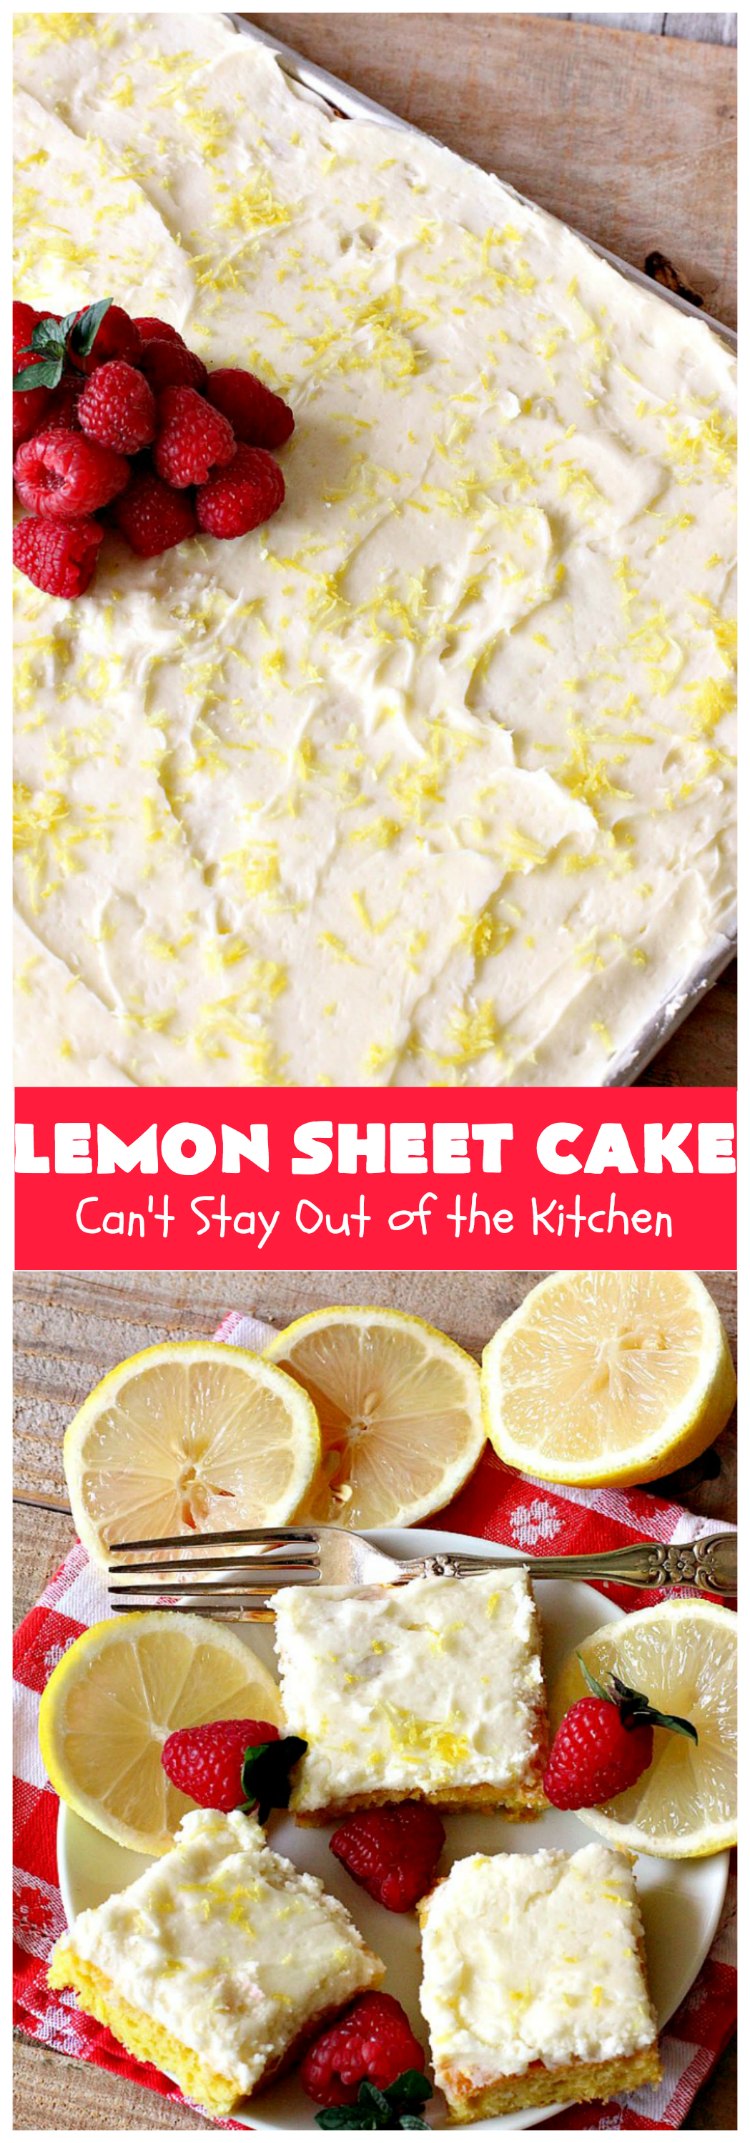 Lemon Sheet Cake |  Can't Stay Out of the Kitchen | this delicious #lemon #cake uses only 8 ingredients for the cake & the icing. It's so easy, yet has a luscious lemony taste to die for! The #CreamCheese icing is wonderful. #dessert #tailgating #LemonDessert #LemonSheetCake #Holiday #HolidayDessert 